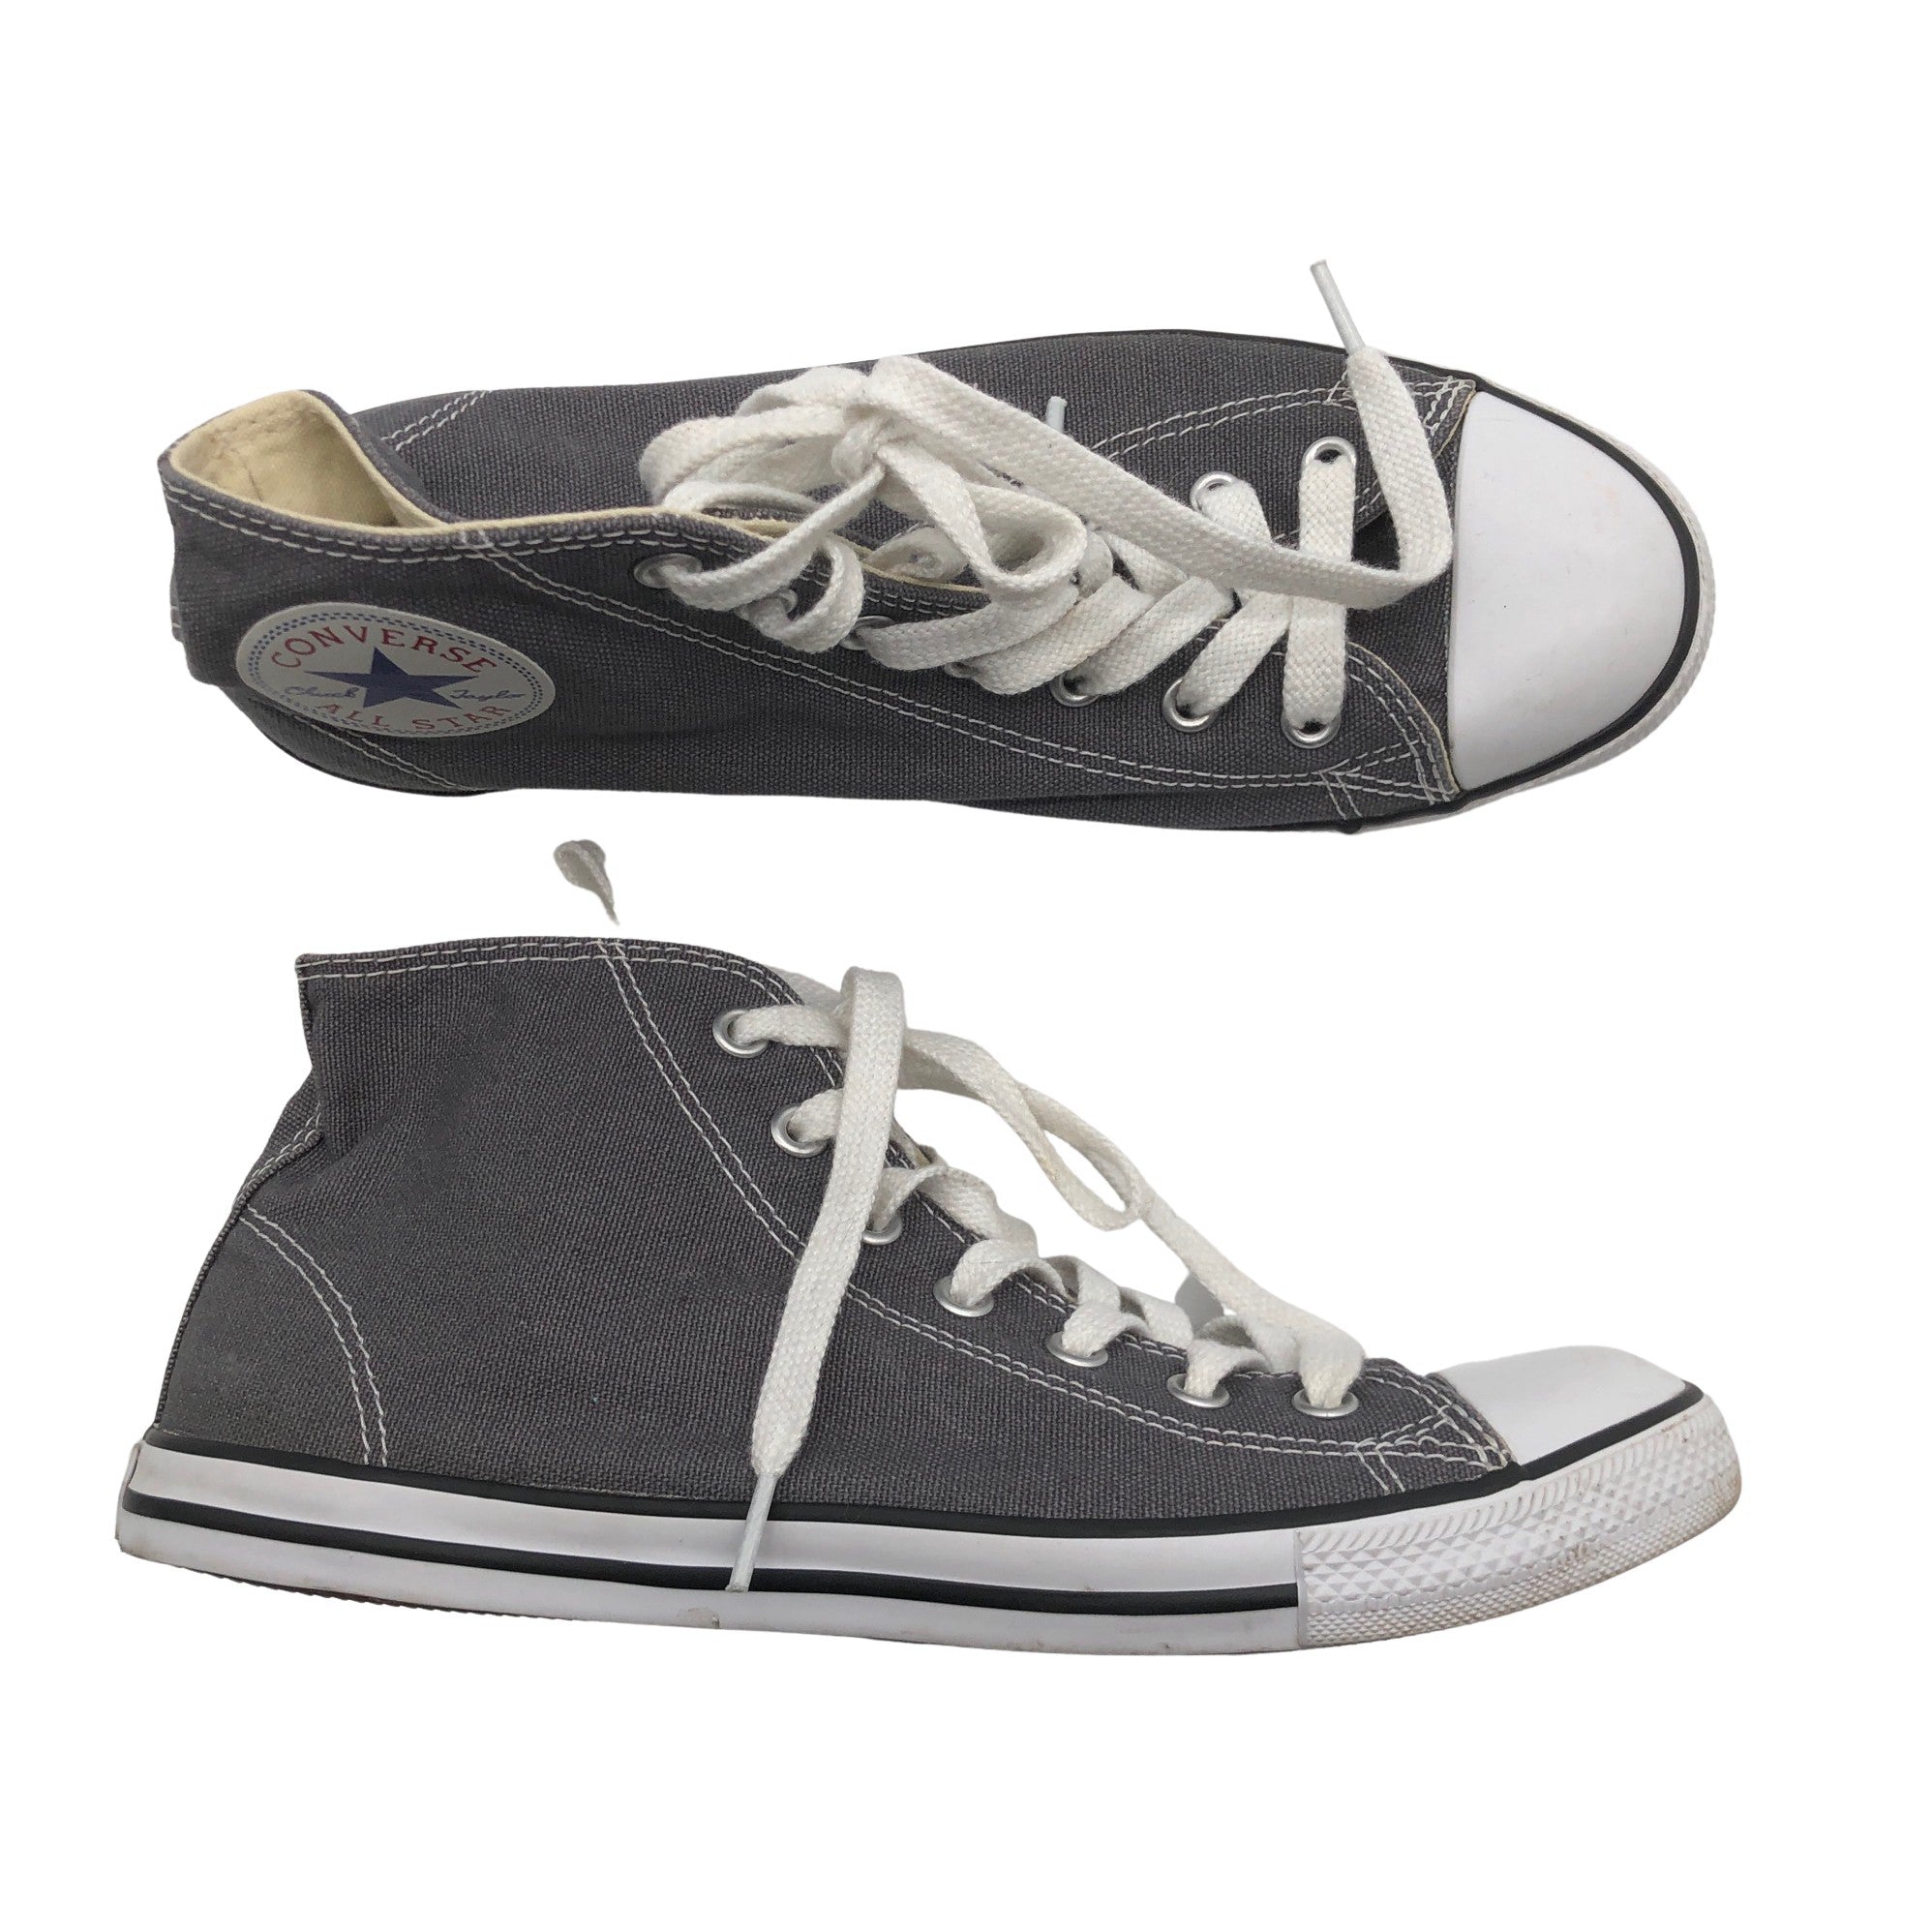 Unisex Converse sneakers, size 38 (Grey) | Emmy